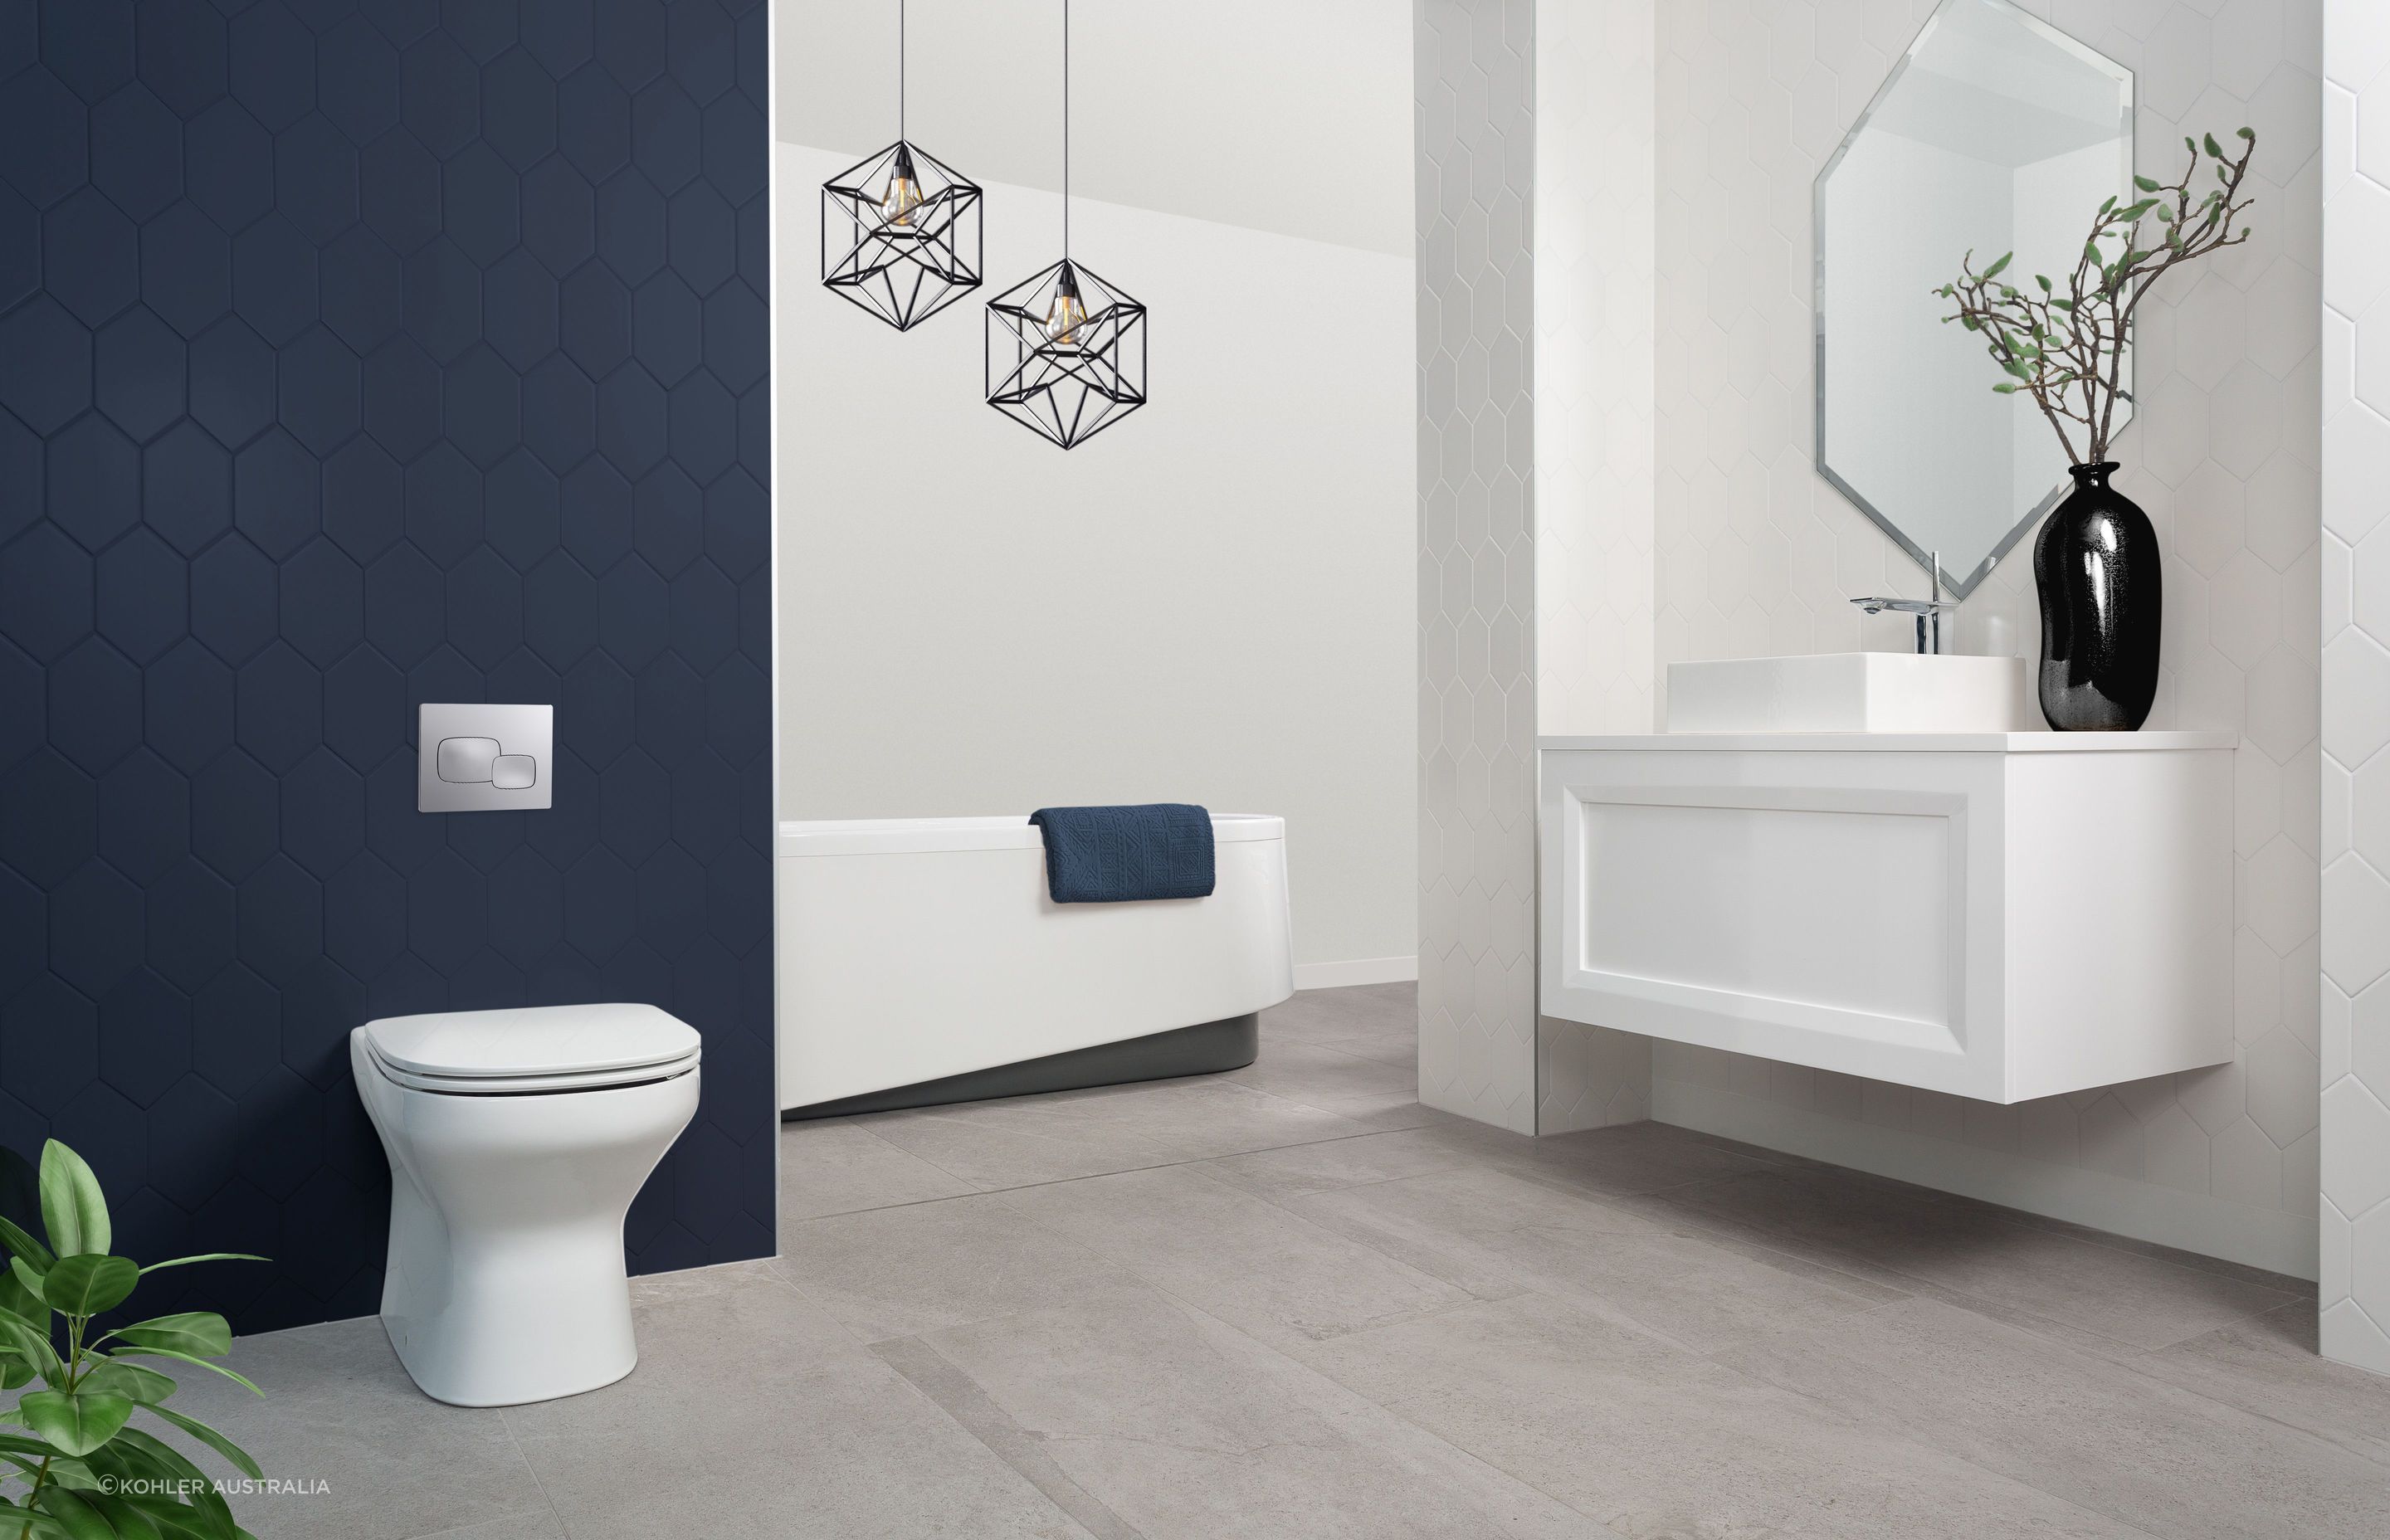 Wall-faced toilets are designed with streamlined features to optimise space.